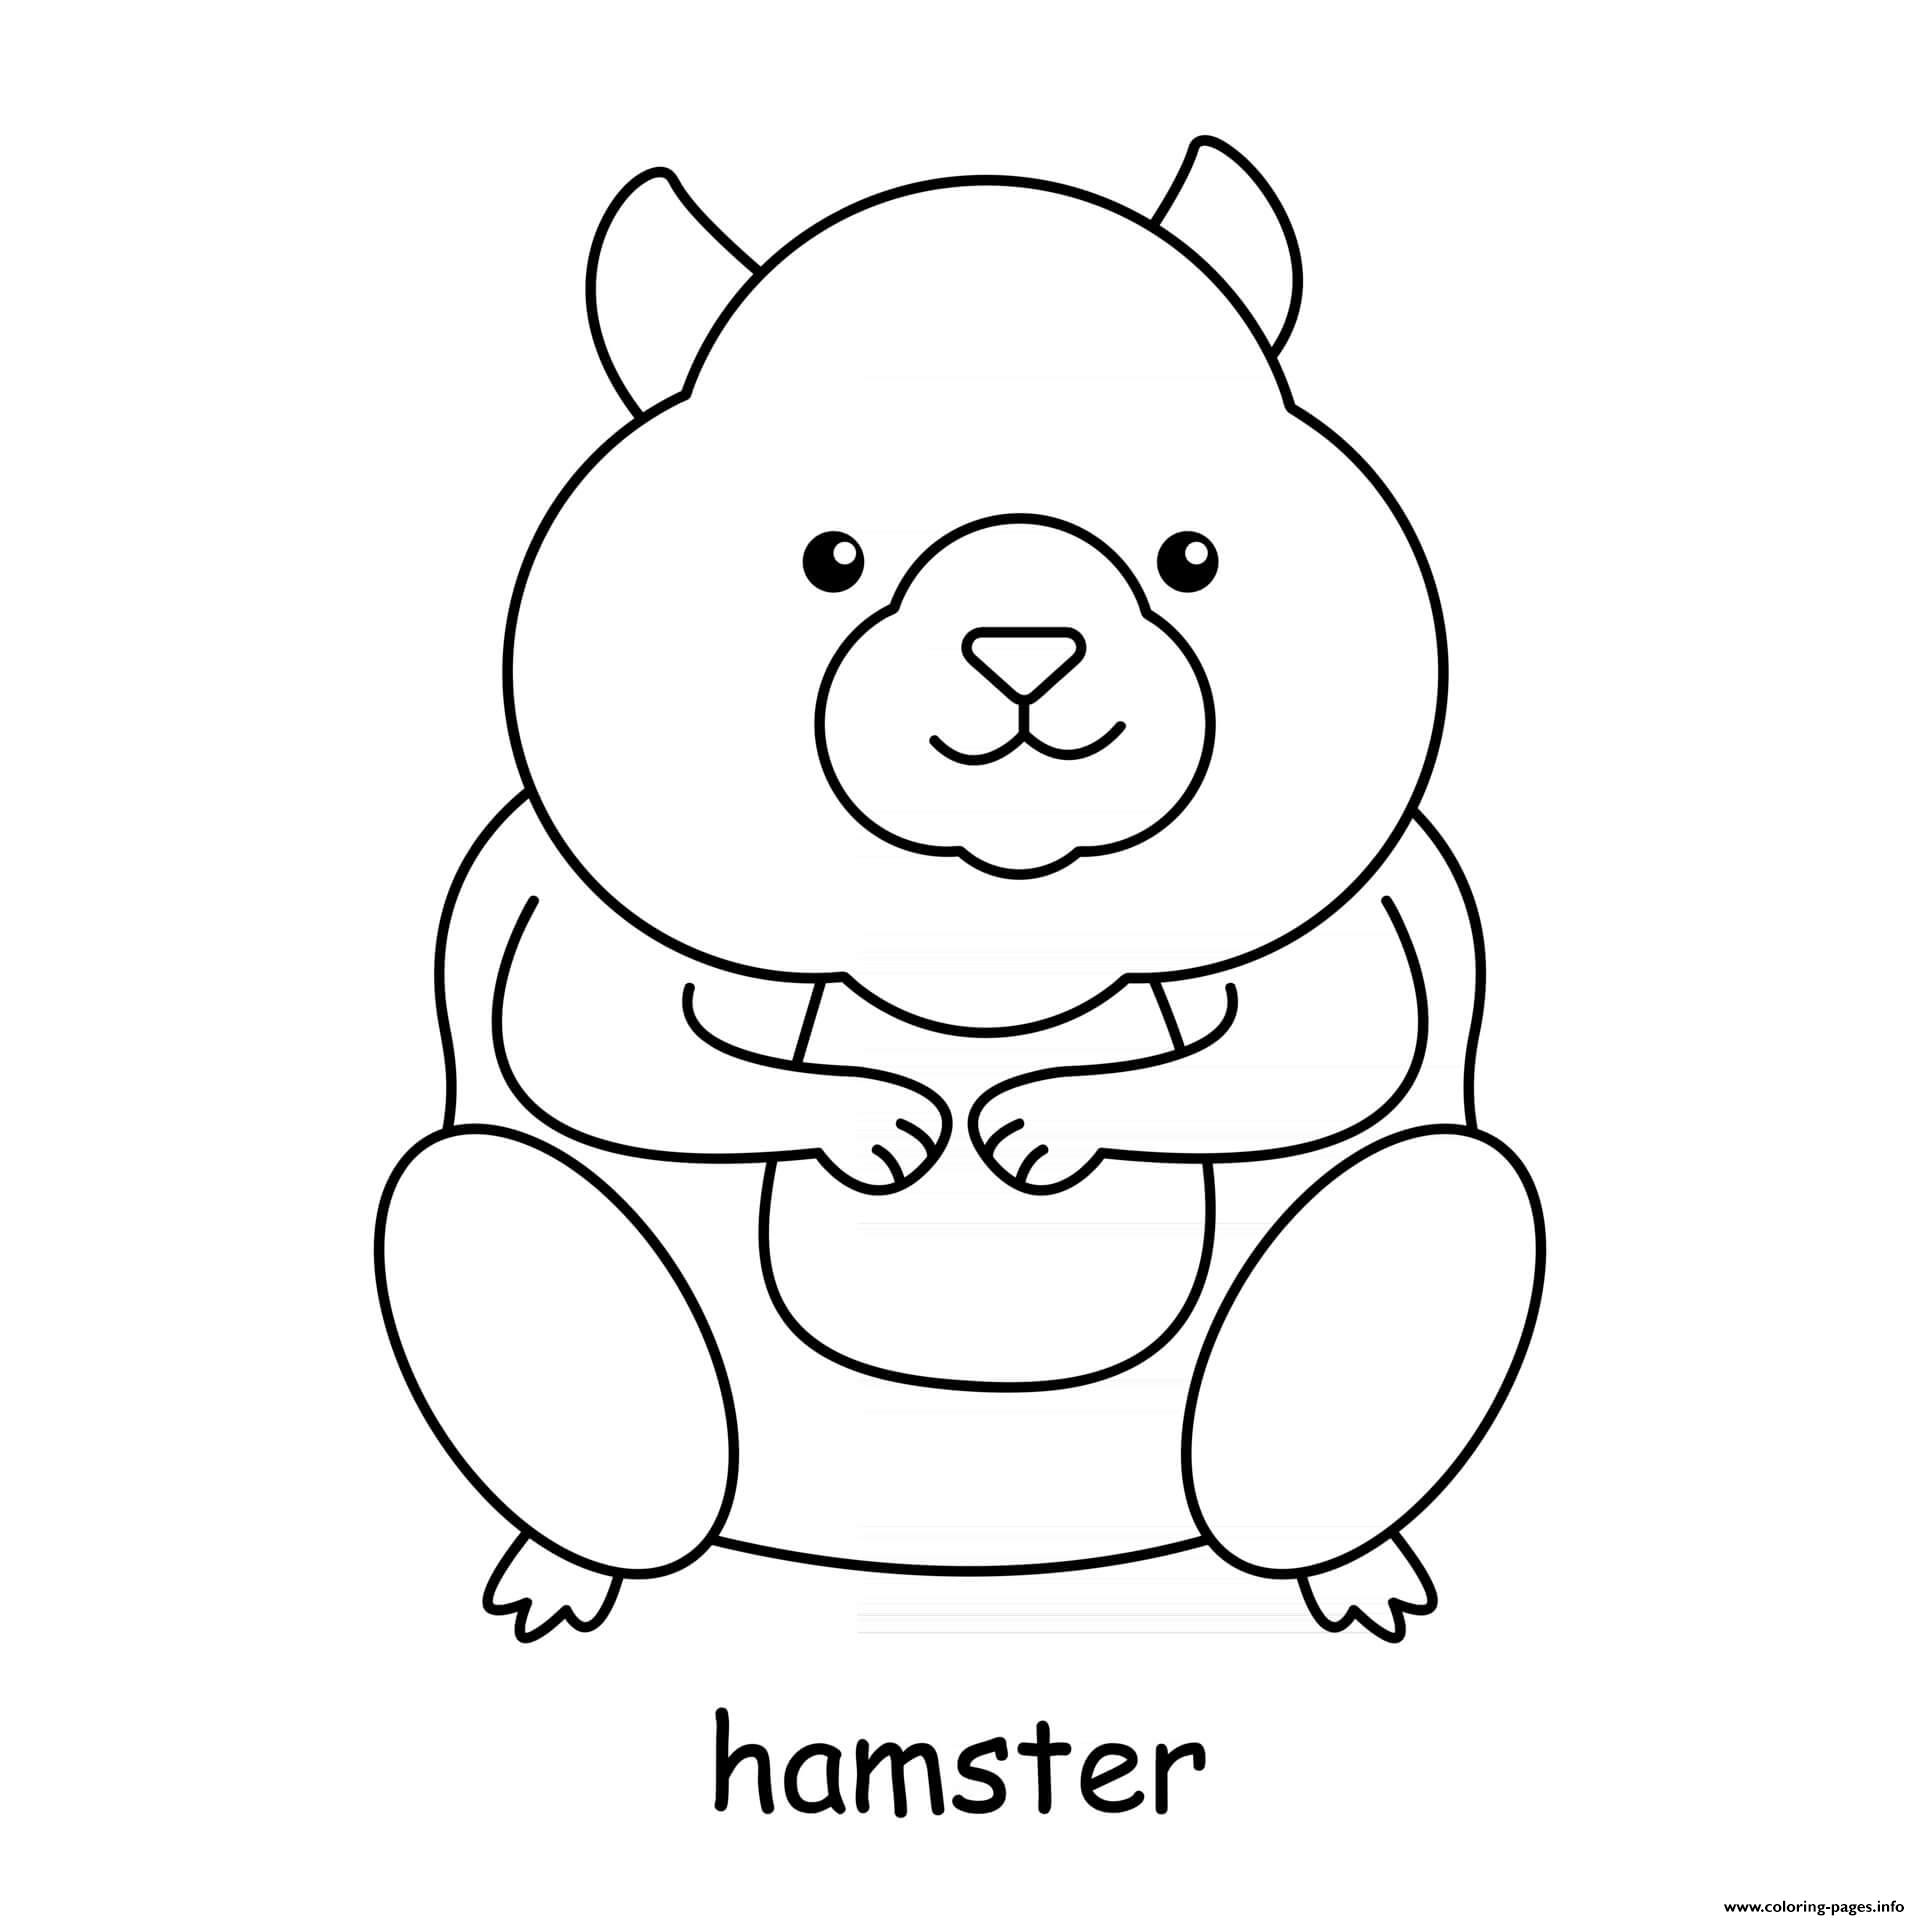 Hamster coloring